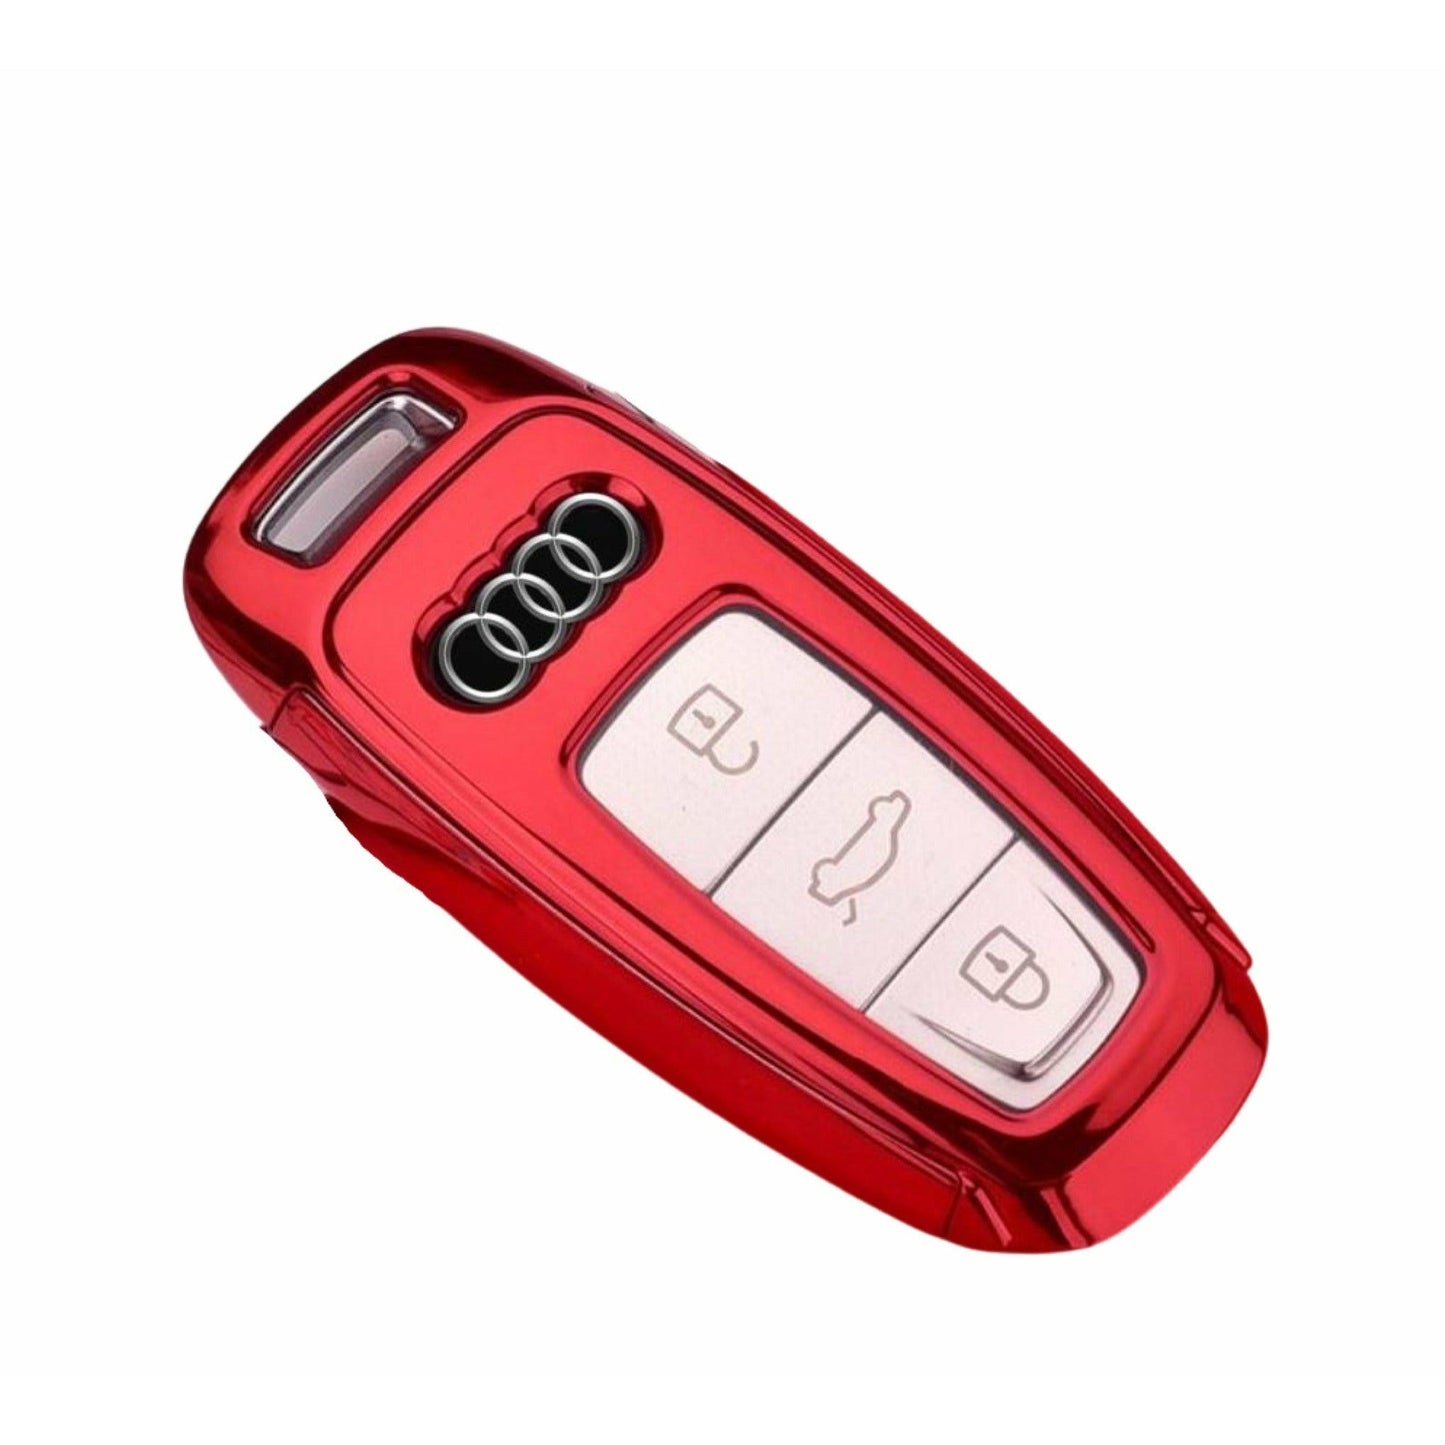 Audi key fob cover  - Red | Keysleeves